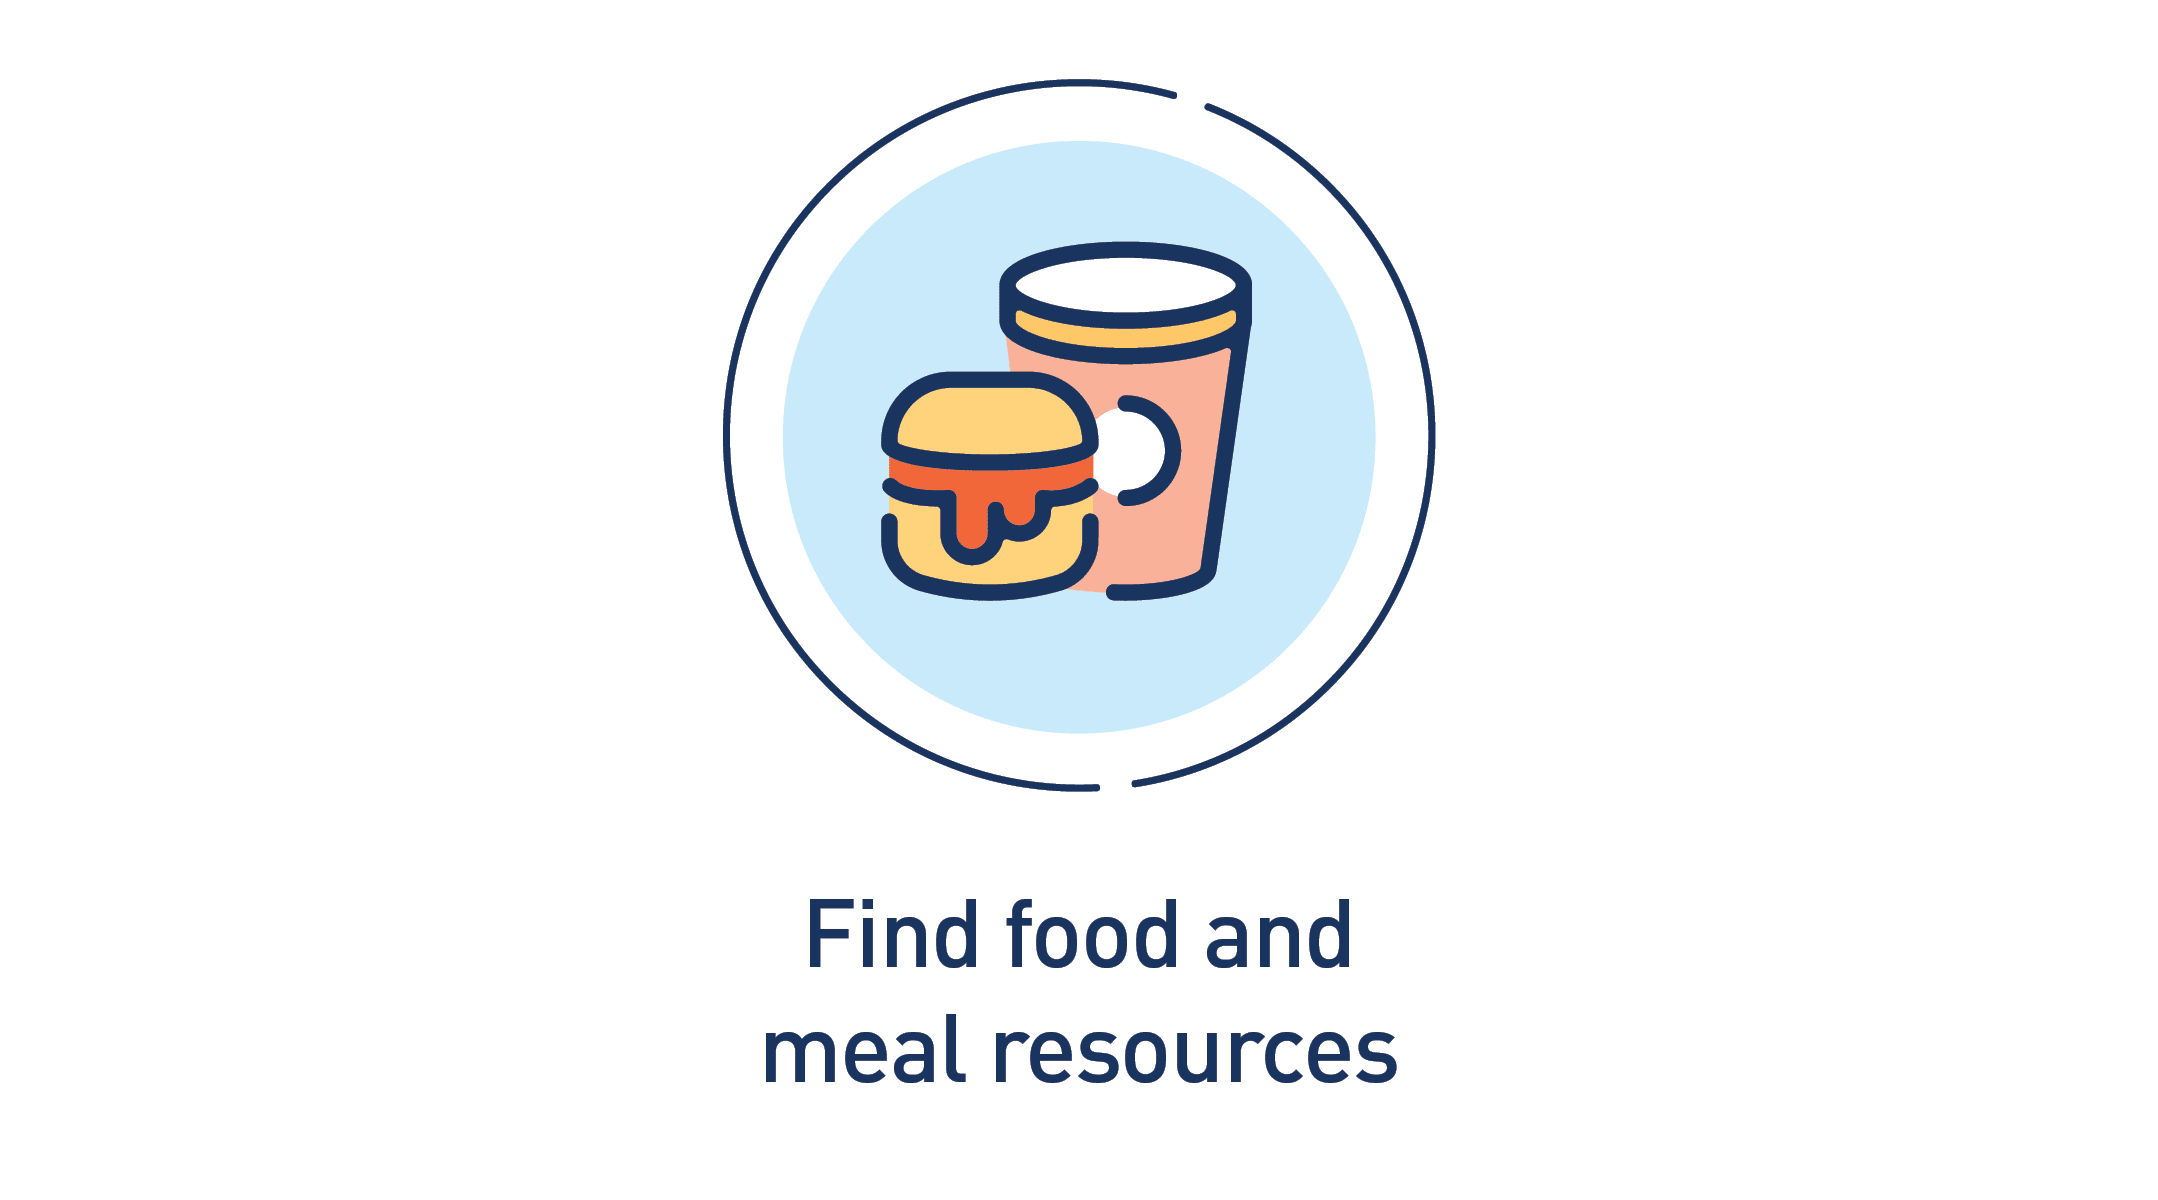 Graphic of a burger and a drink. Text: Find food and meal resources